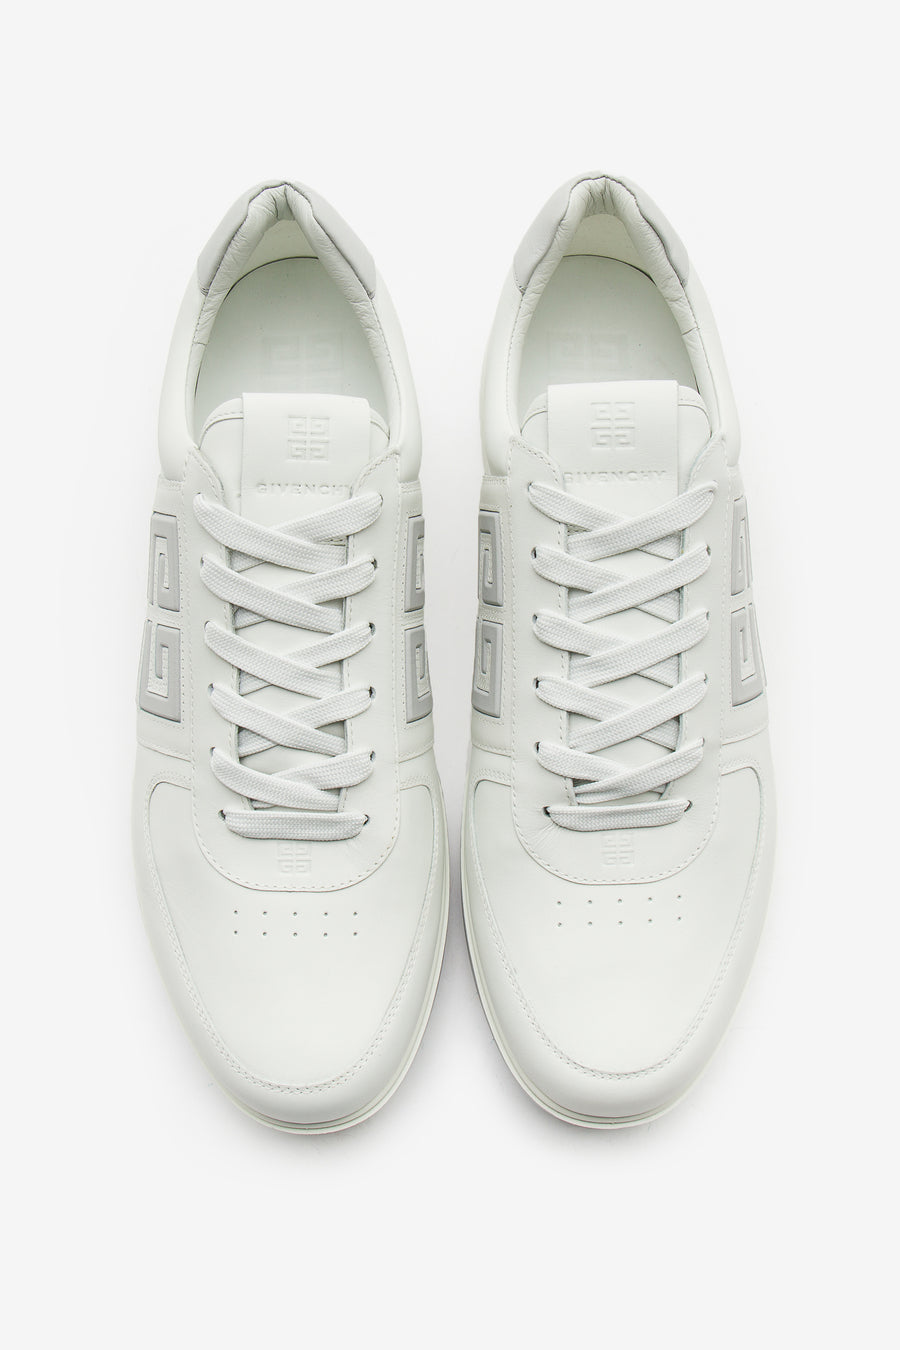 Givenchy G4 Low-Top Sneakers